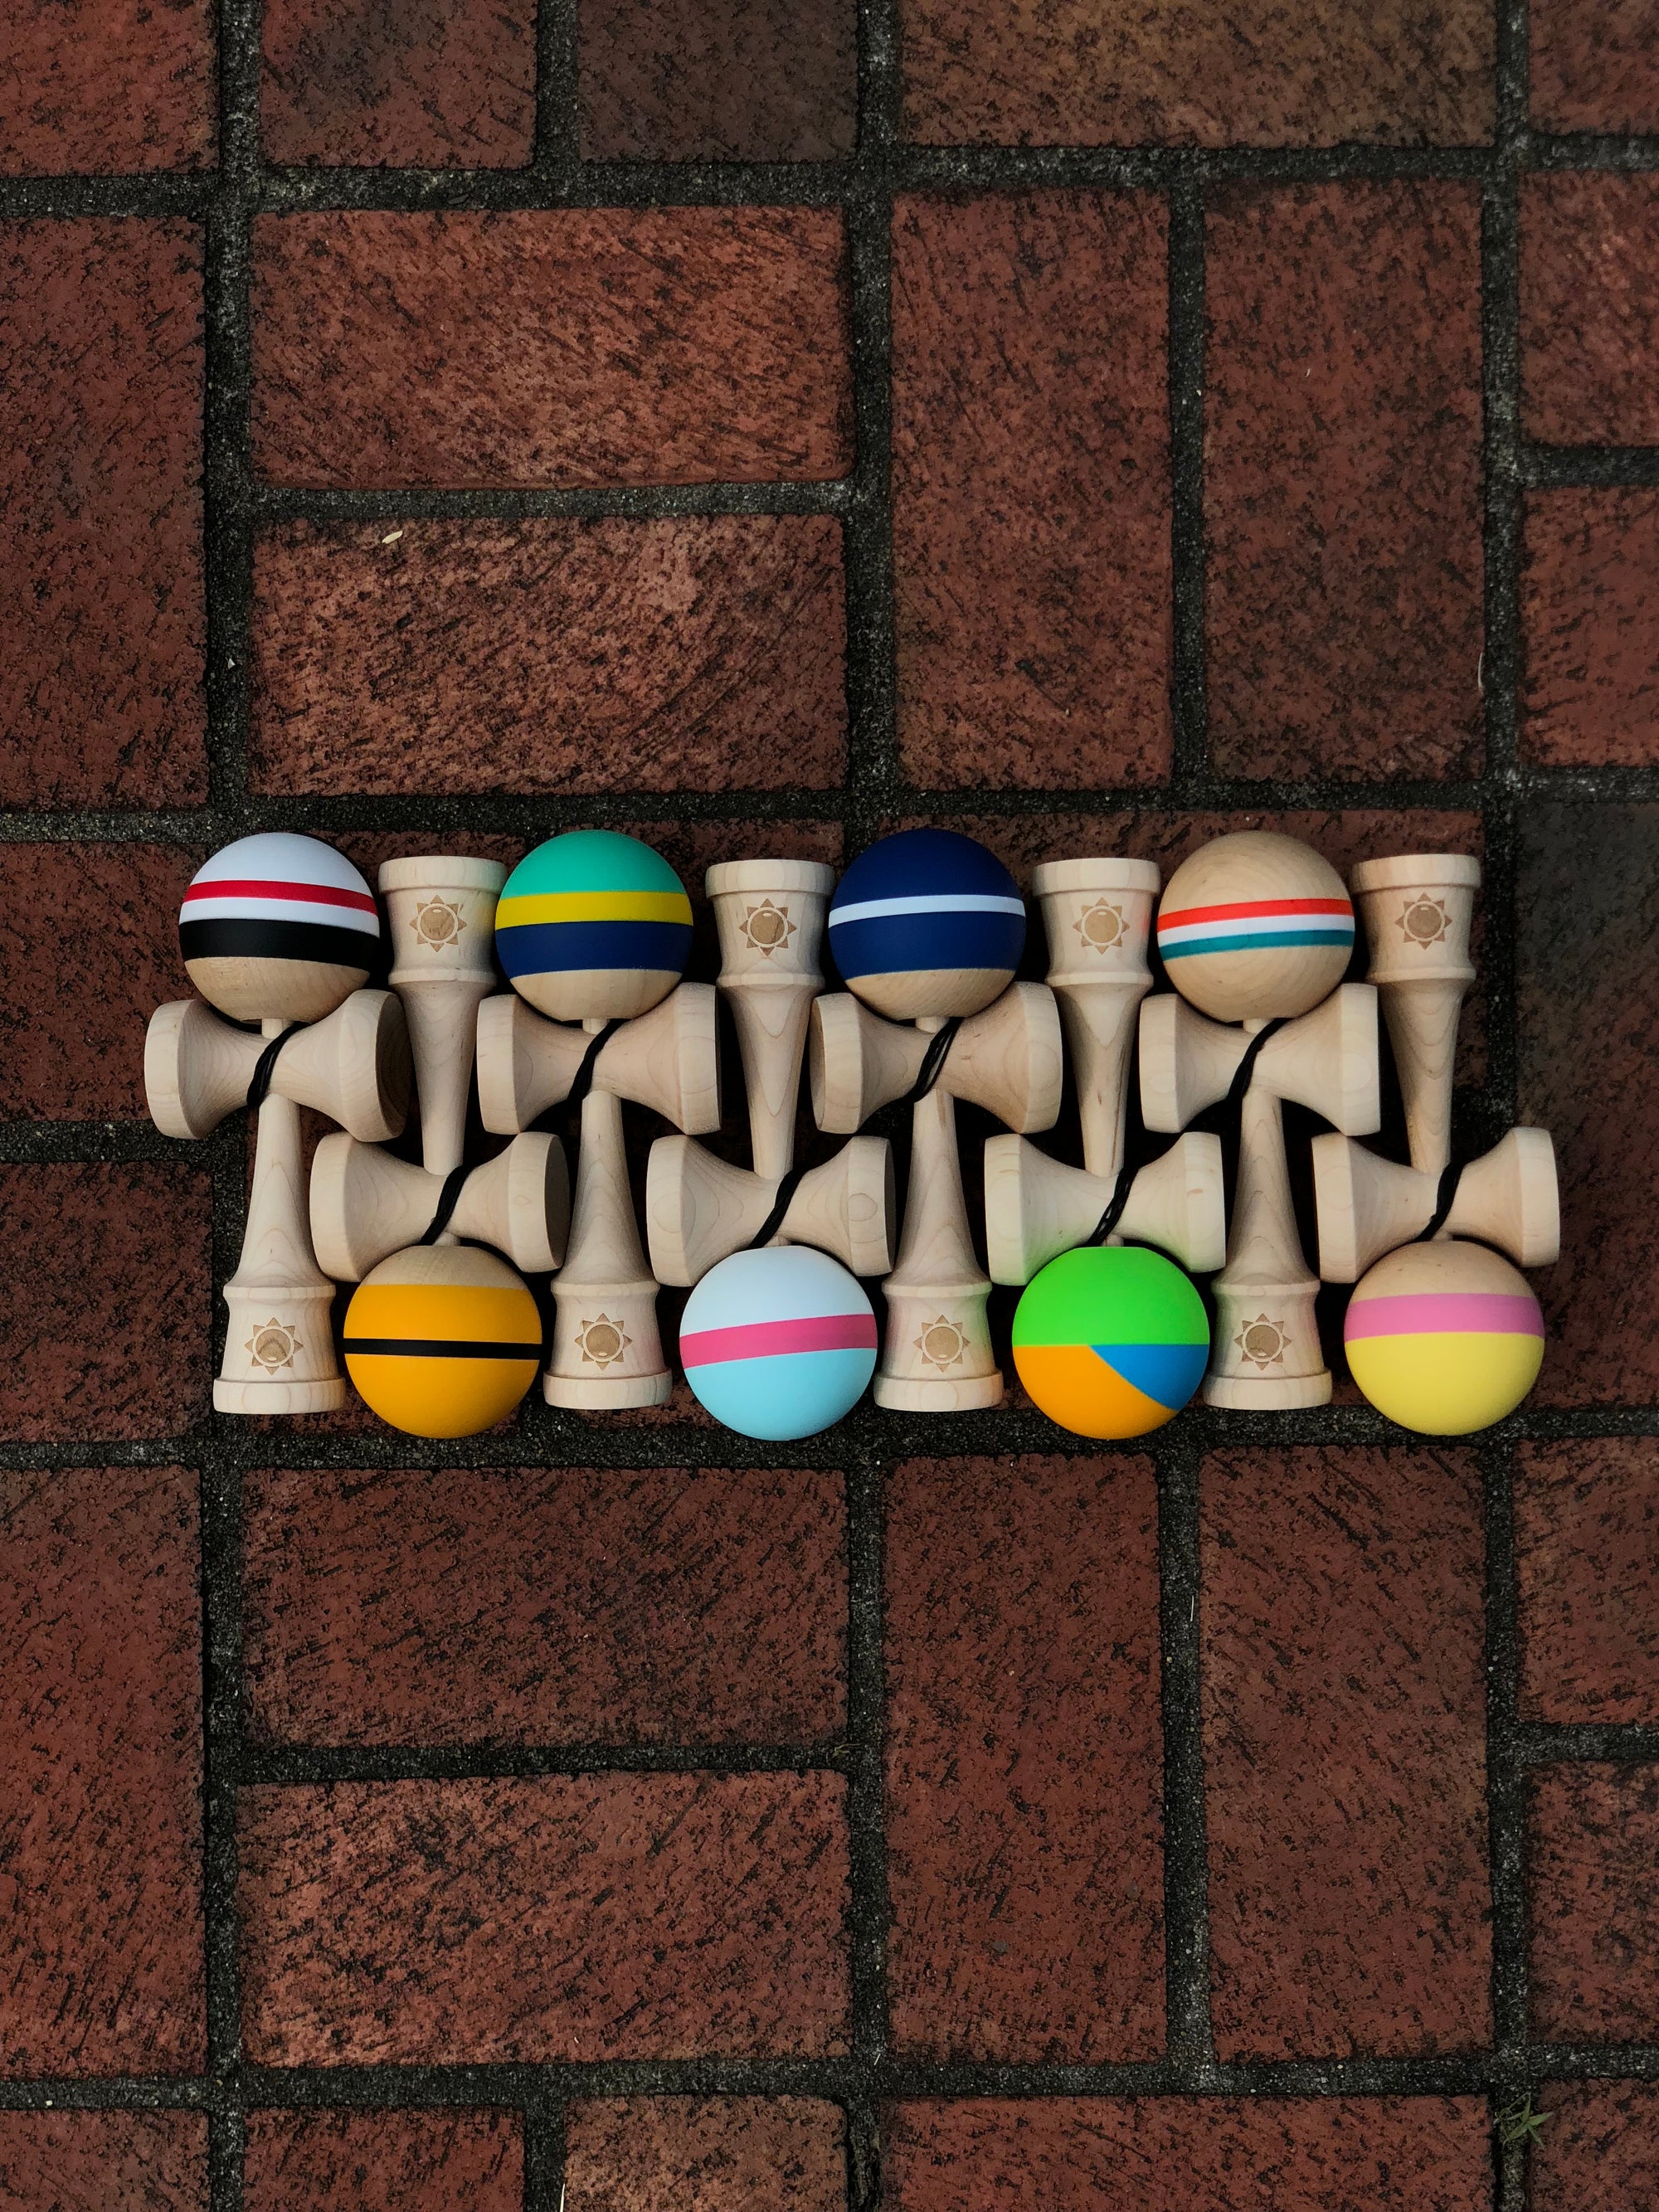 Types of Paints Used for Kendamas and Why It Matters